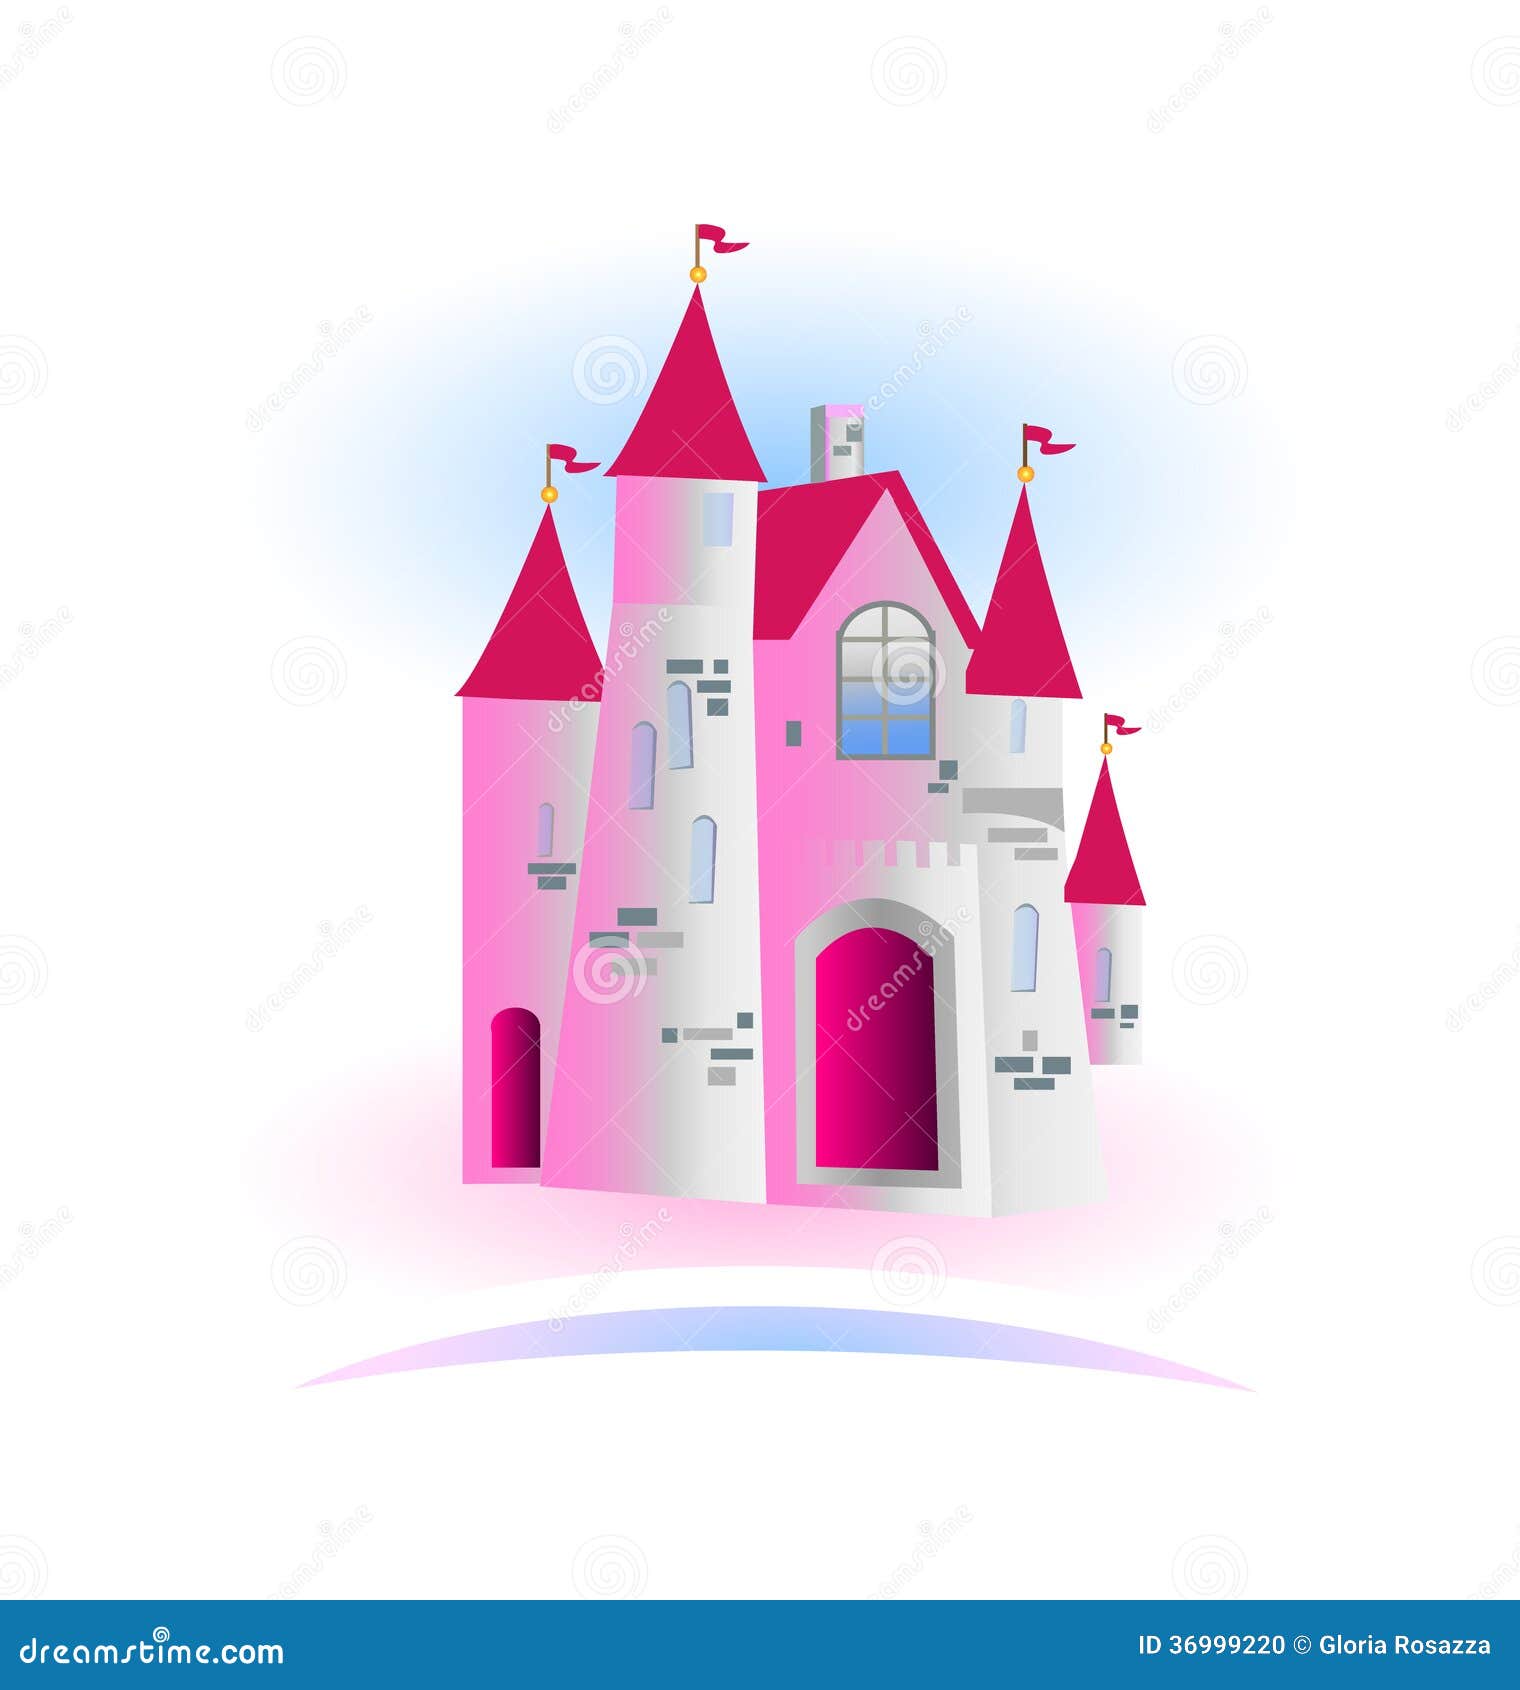 Castle princess with pink flags logo vector